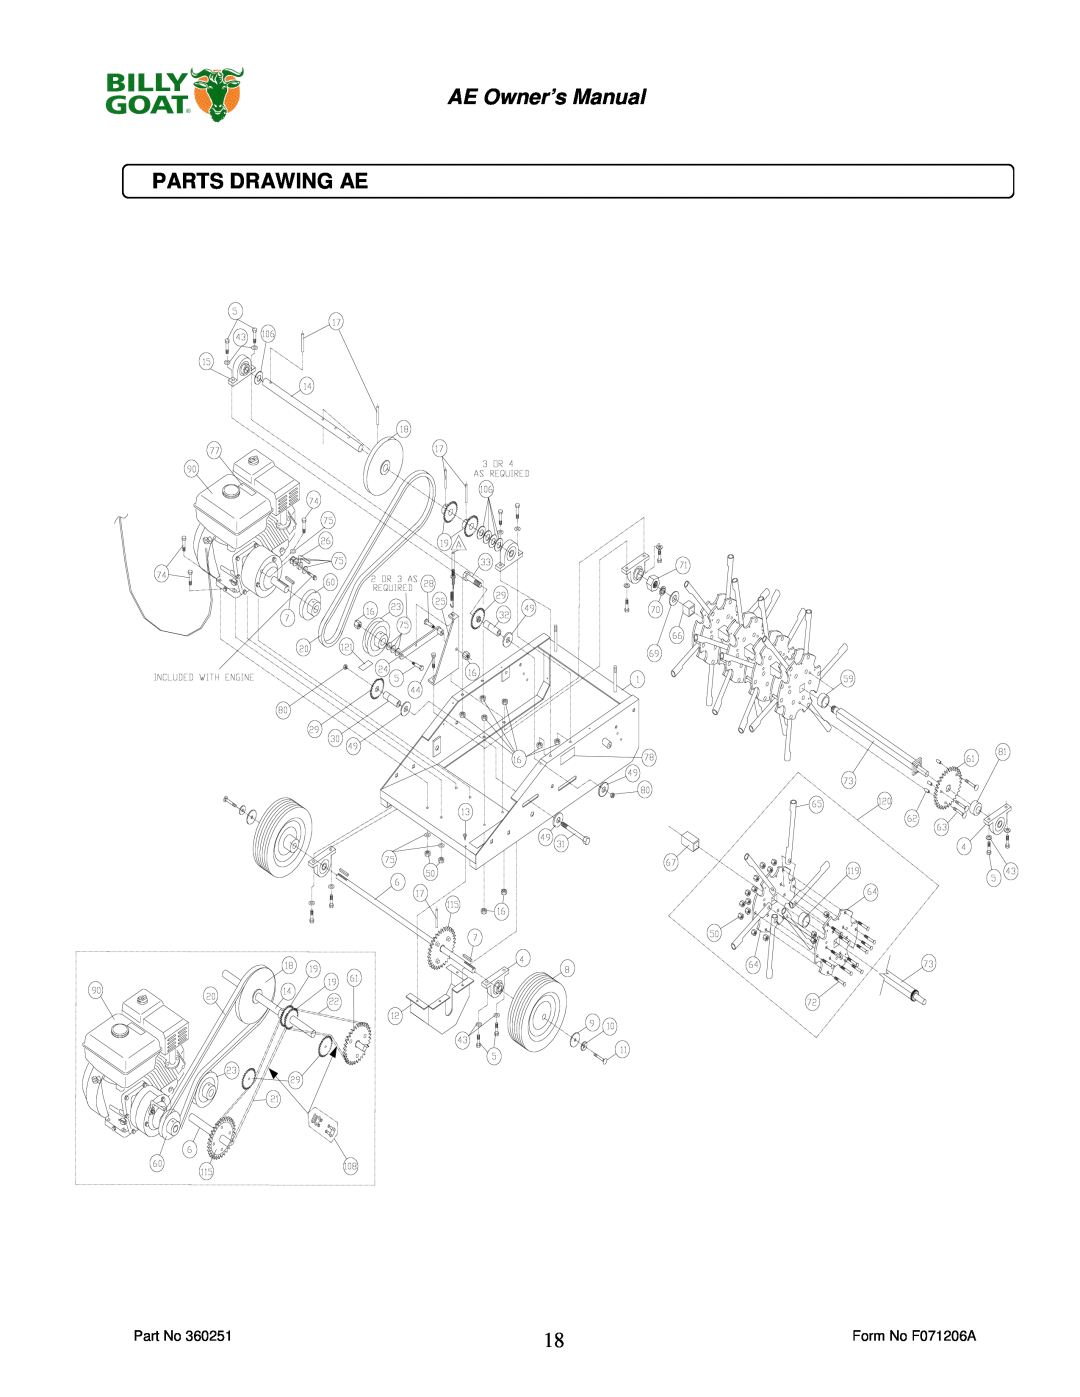 Billy Goat AE400H, AE450 owner manual Parts Drawing Ae 